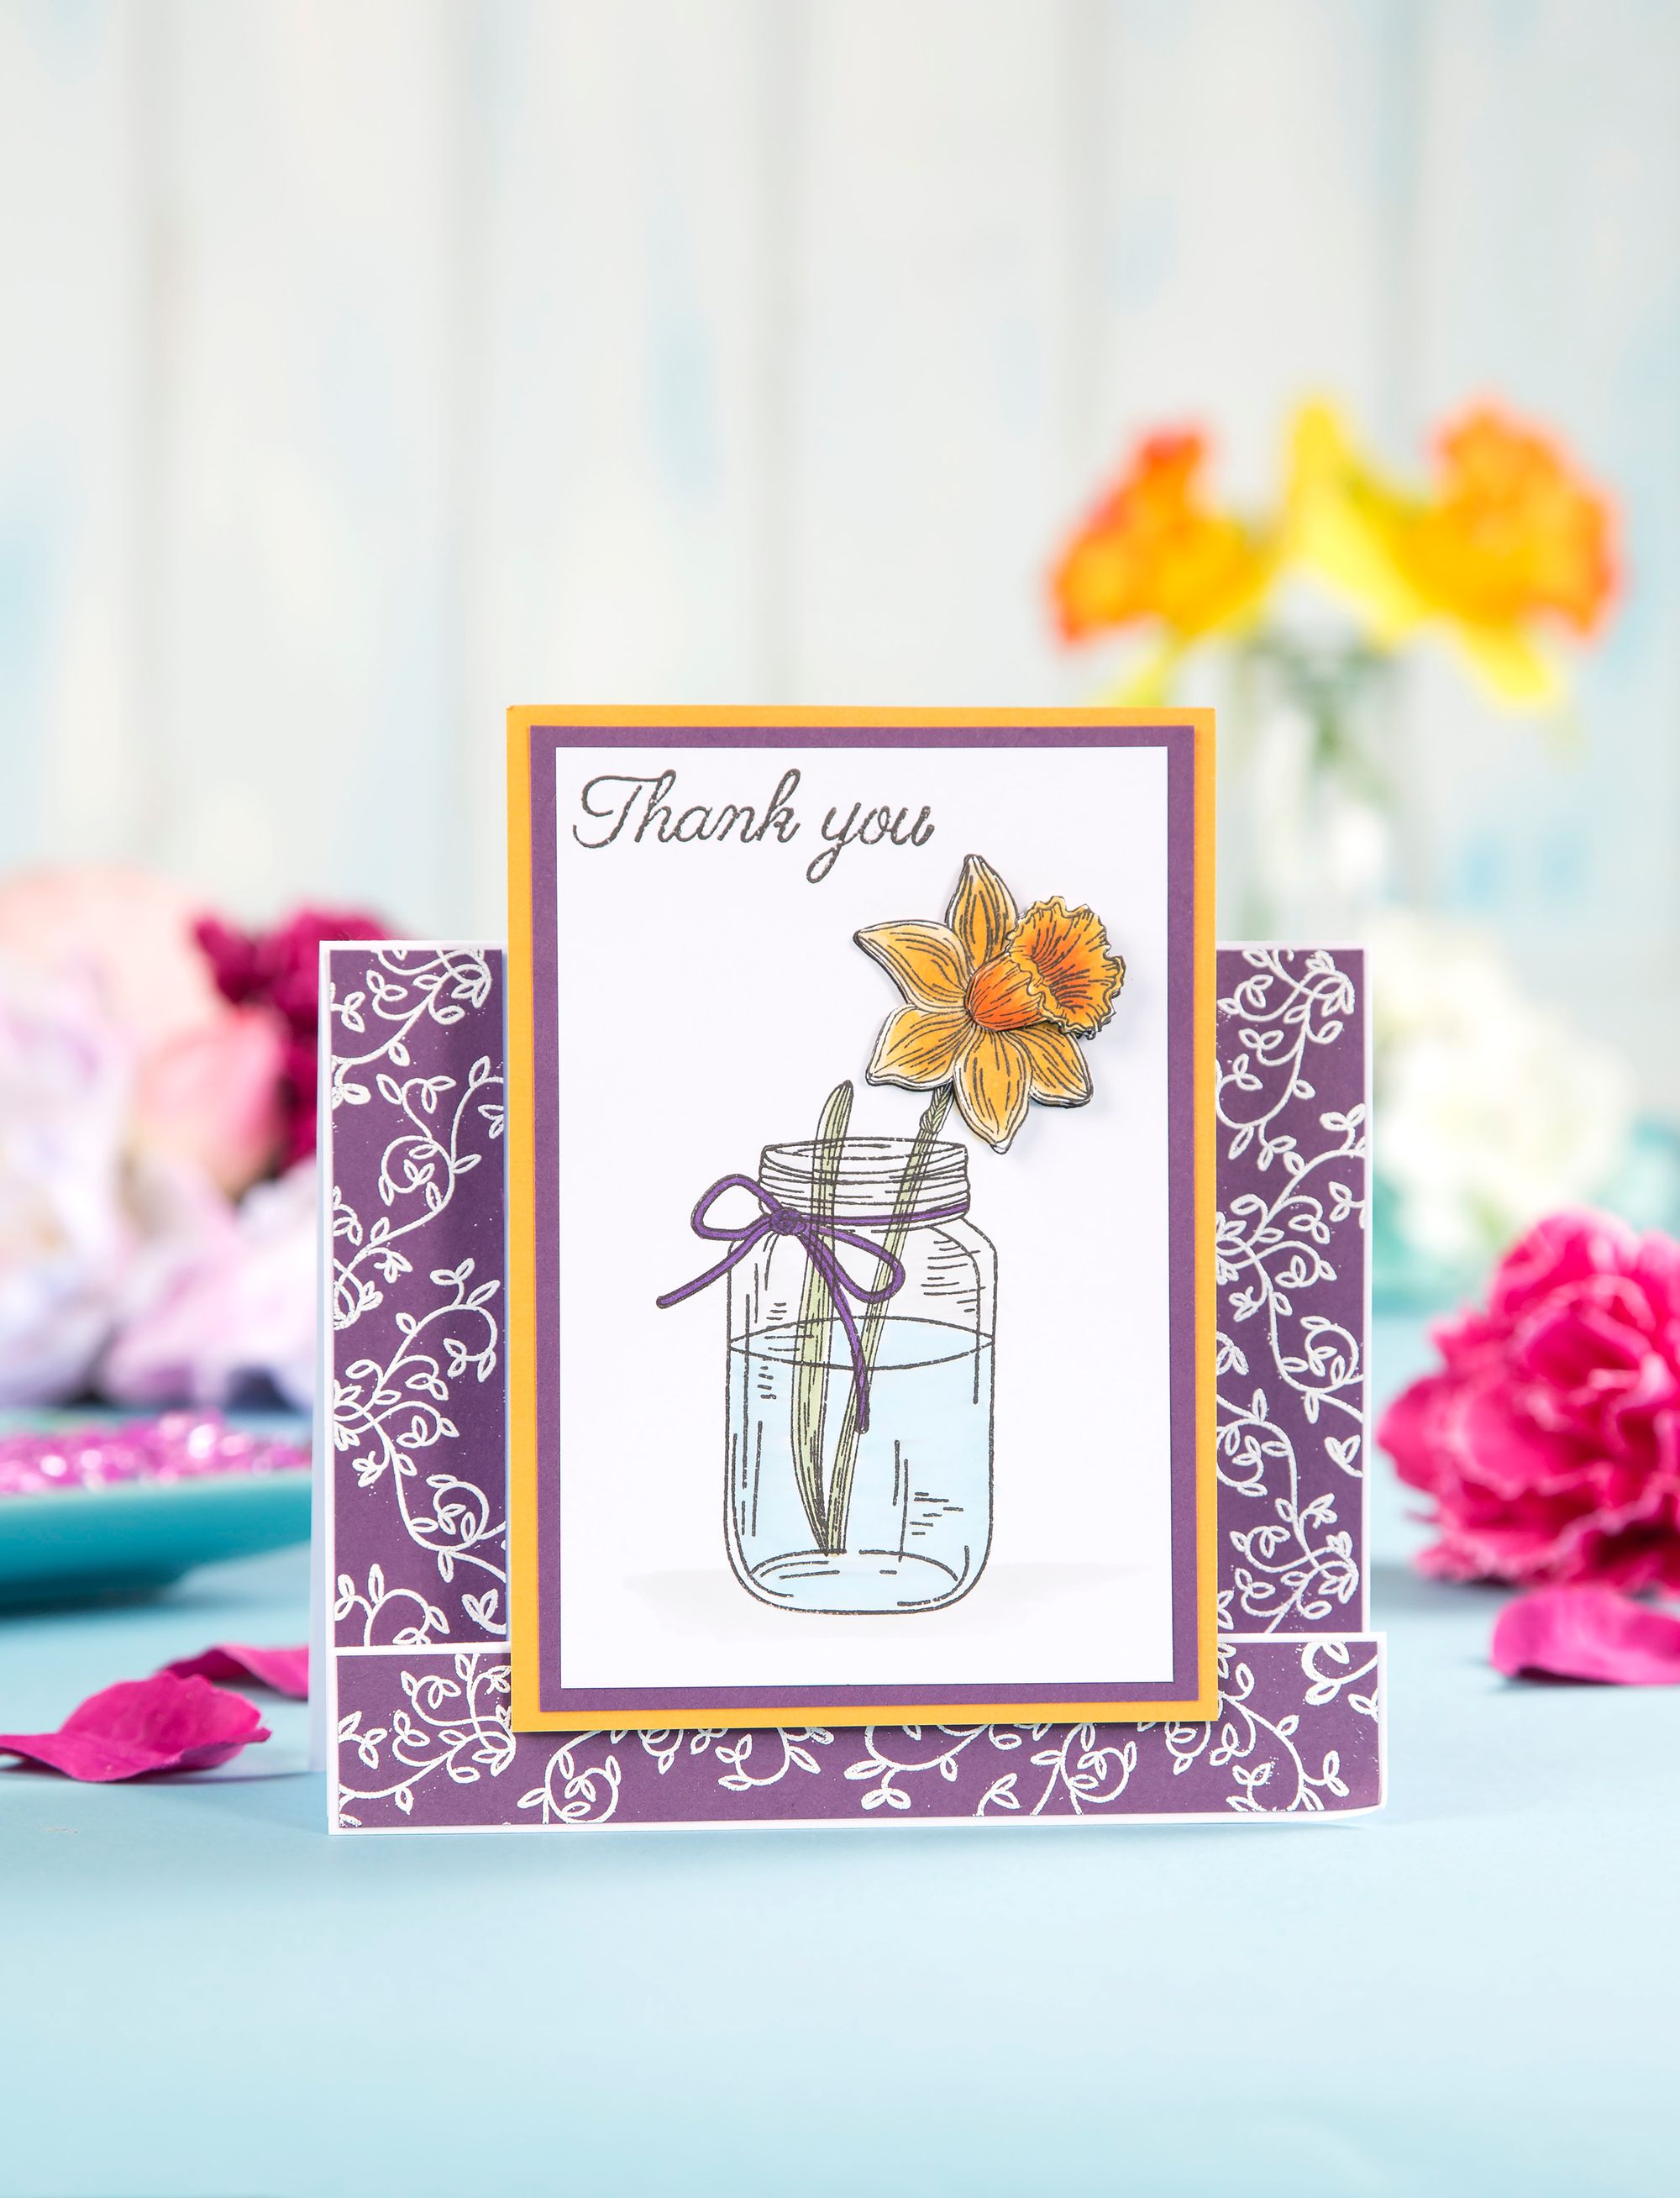 Thank You Card Made with Free Digital Stamp Set